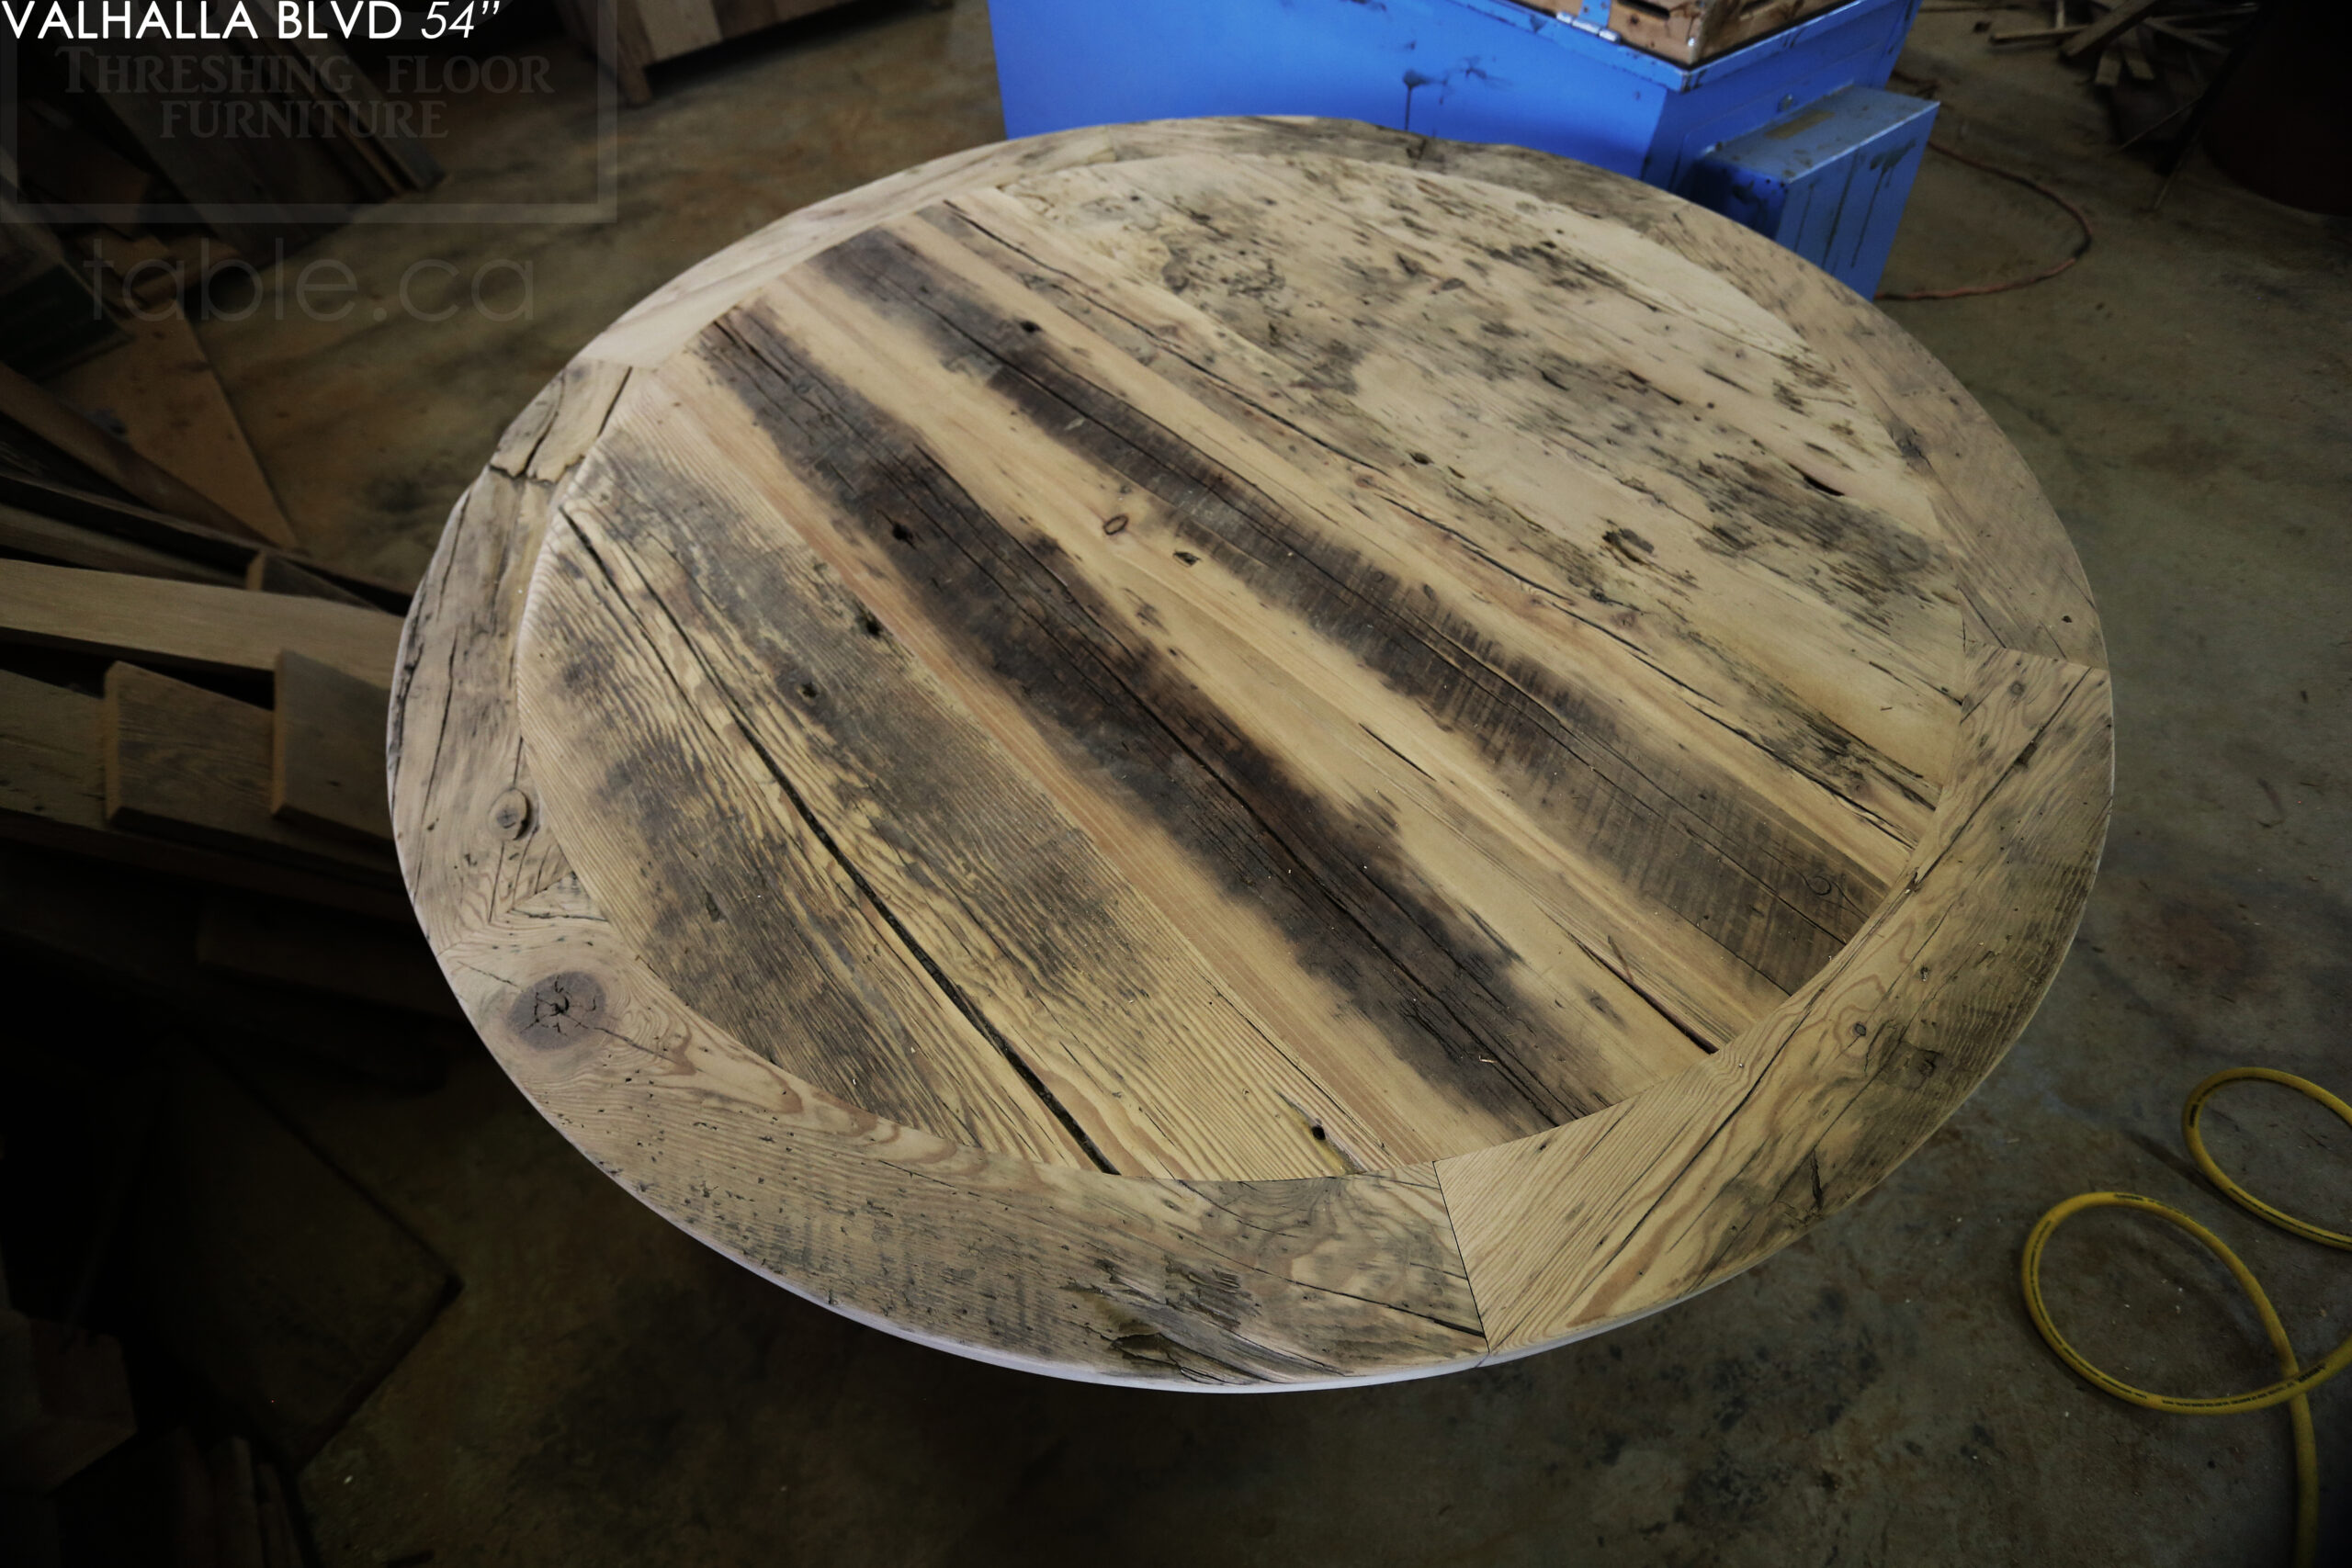 54" Ontario Barnwood Round Table we made for a Scarborough, Ontario home - Hand-Hewn Beam Pedestal Base - 2" Hemlock Threshing Floor Construction top - Greytone Option to maintain the colour of unfinished - Original edges & distressing maintained - Premium epoxy + matte polyurethane finish - www.table.ca